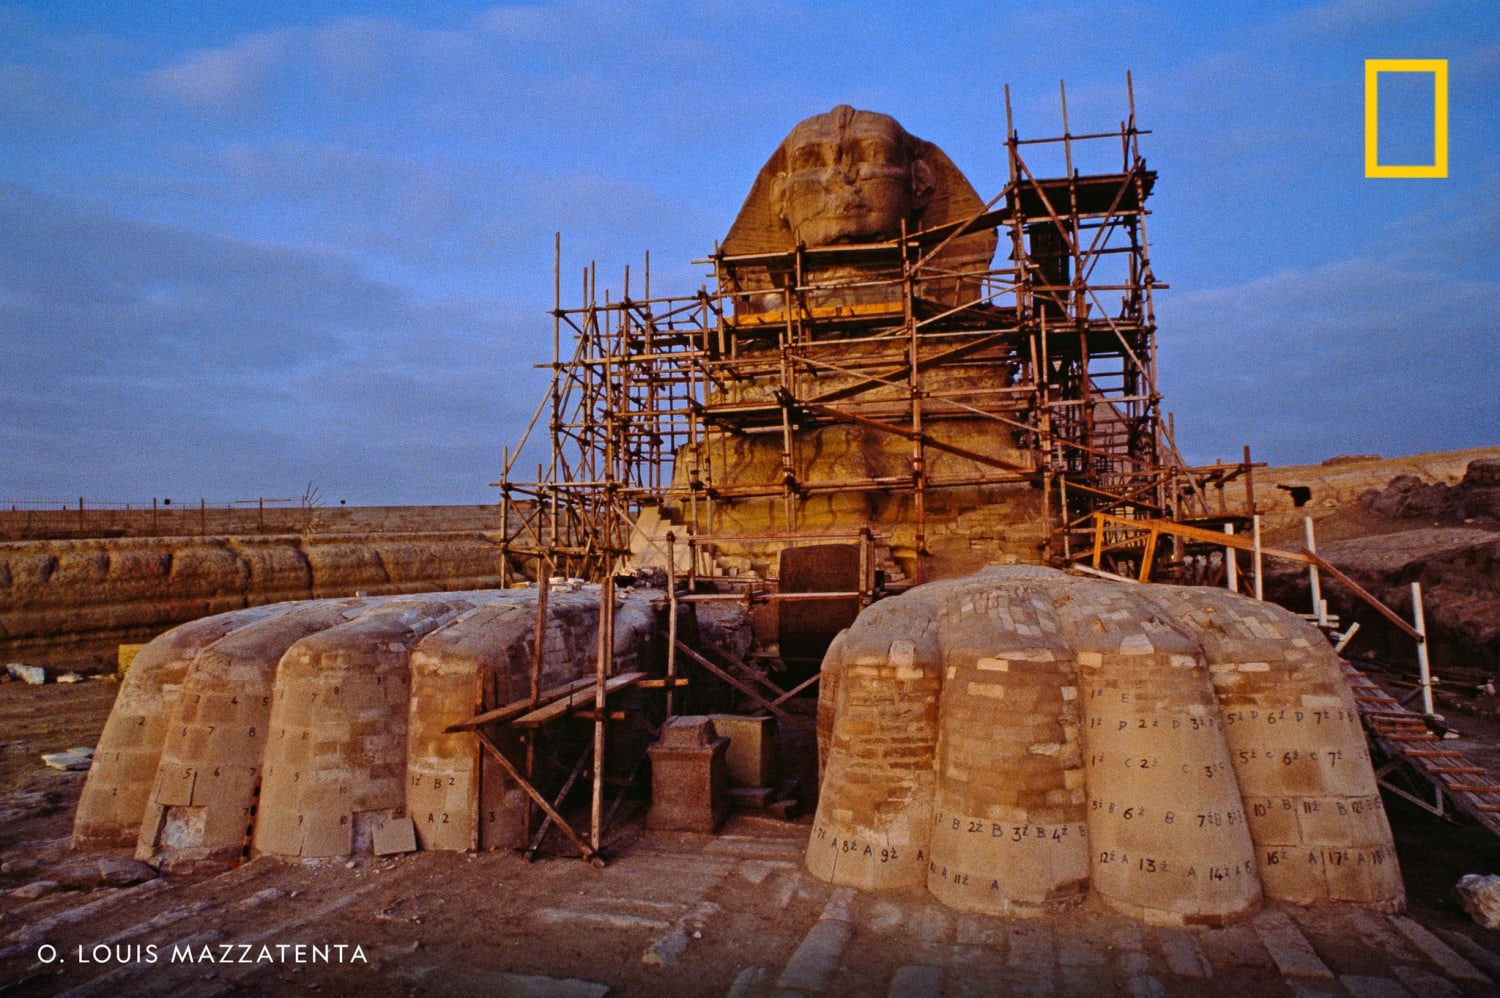 Restoration scaffolding surrounds the Great Sphinx in Giza, Egypt.